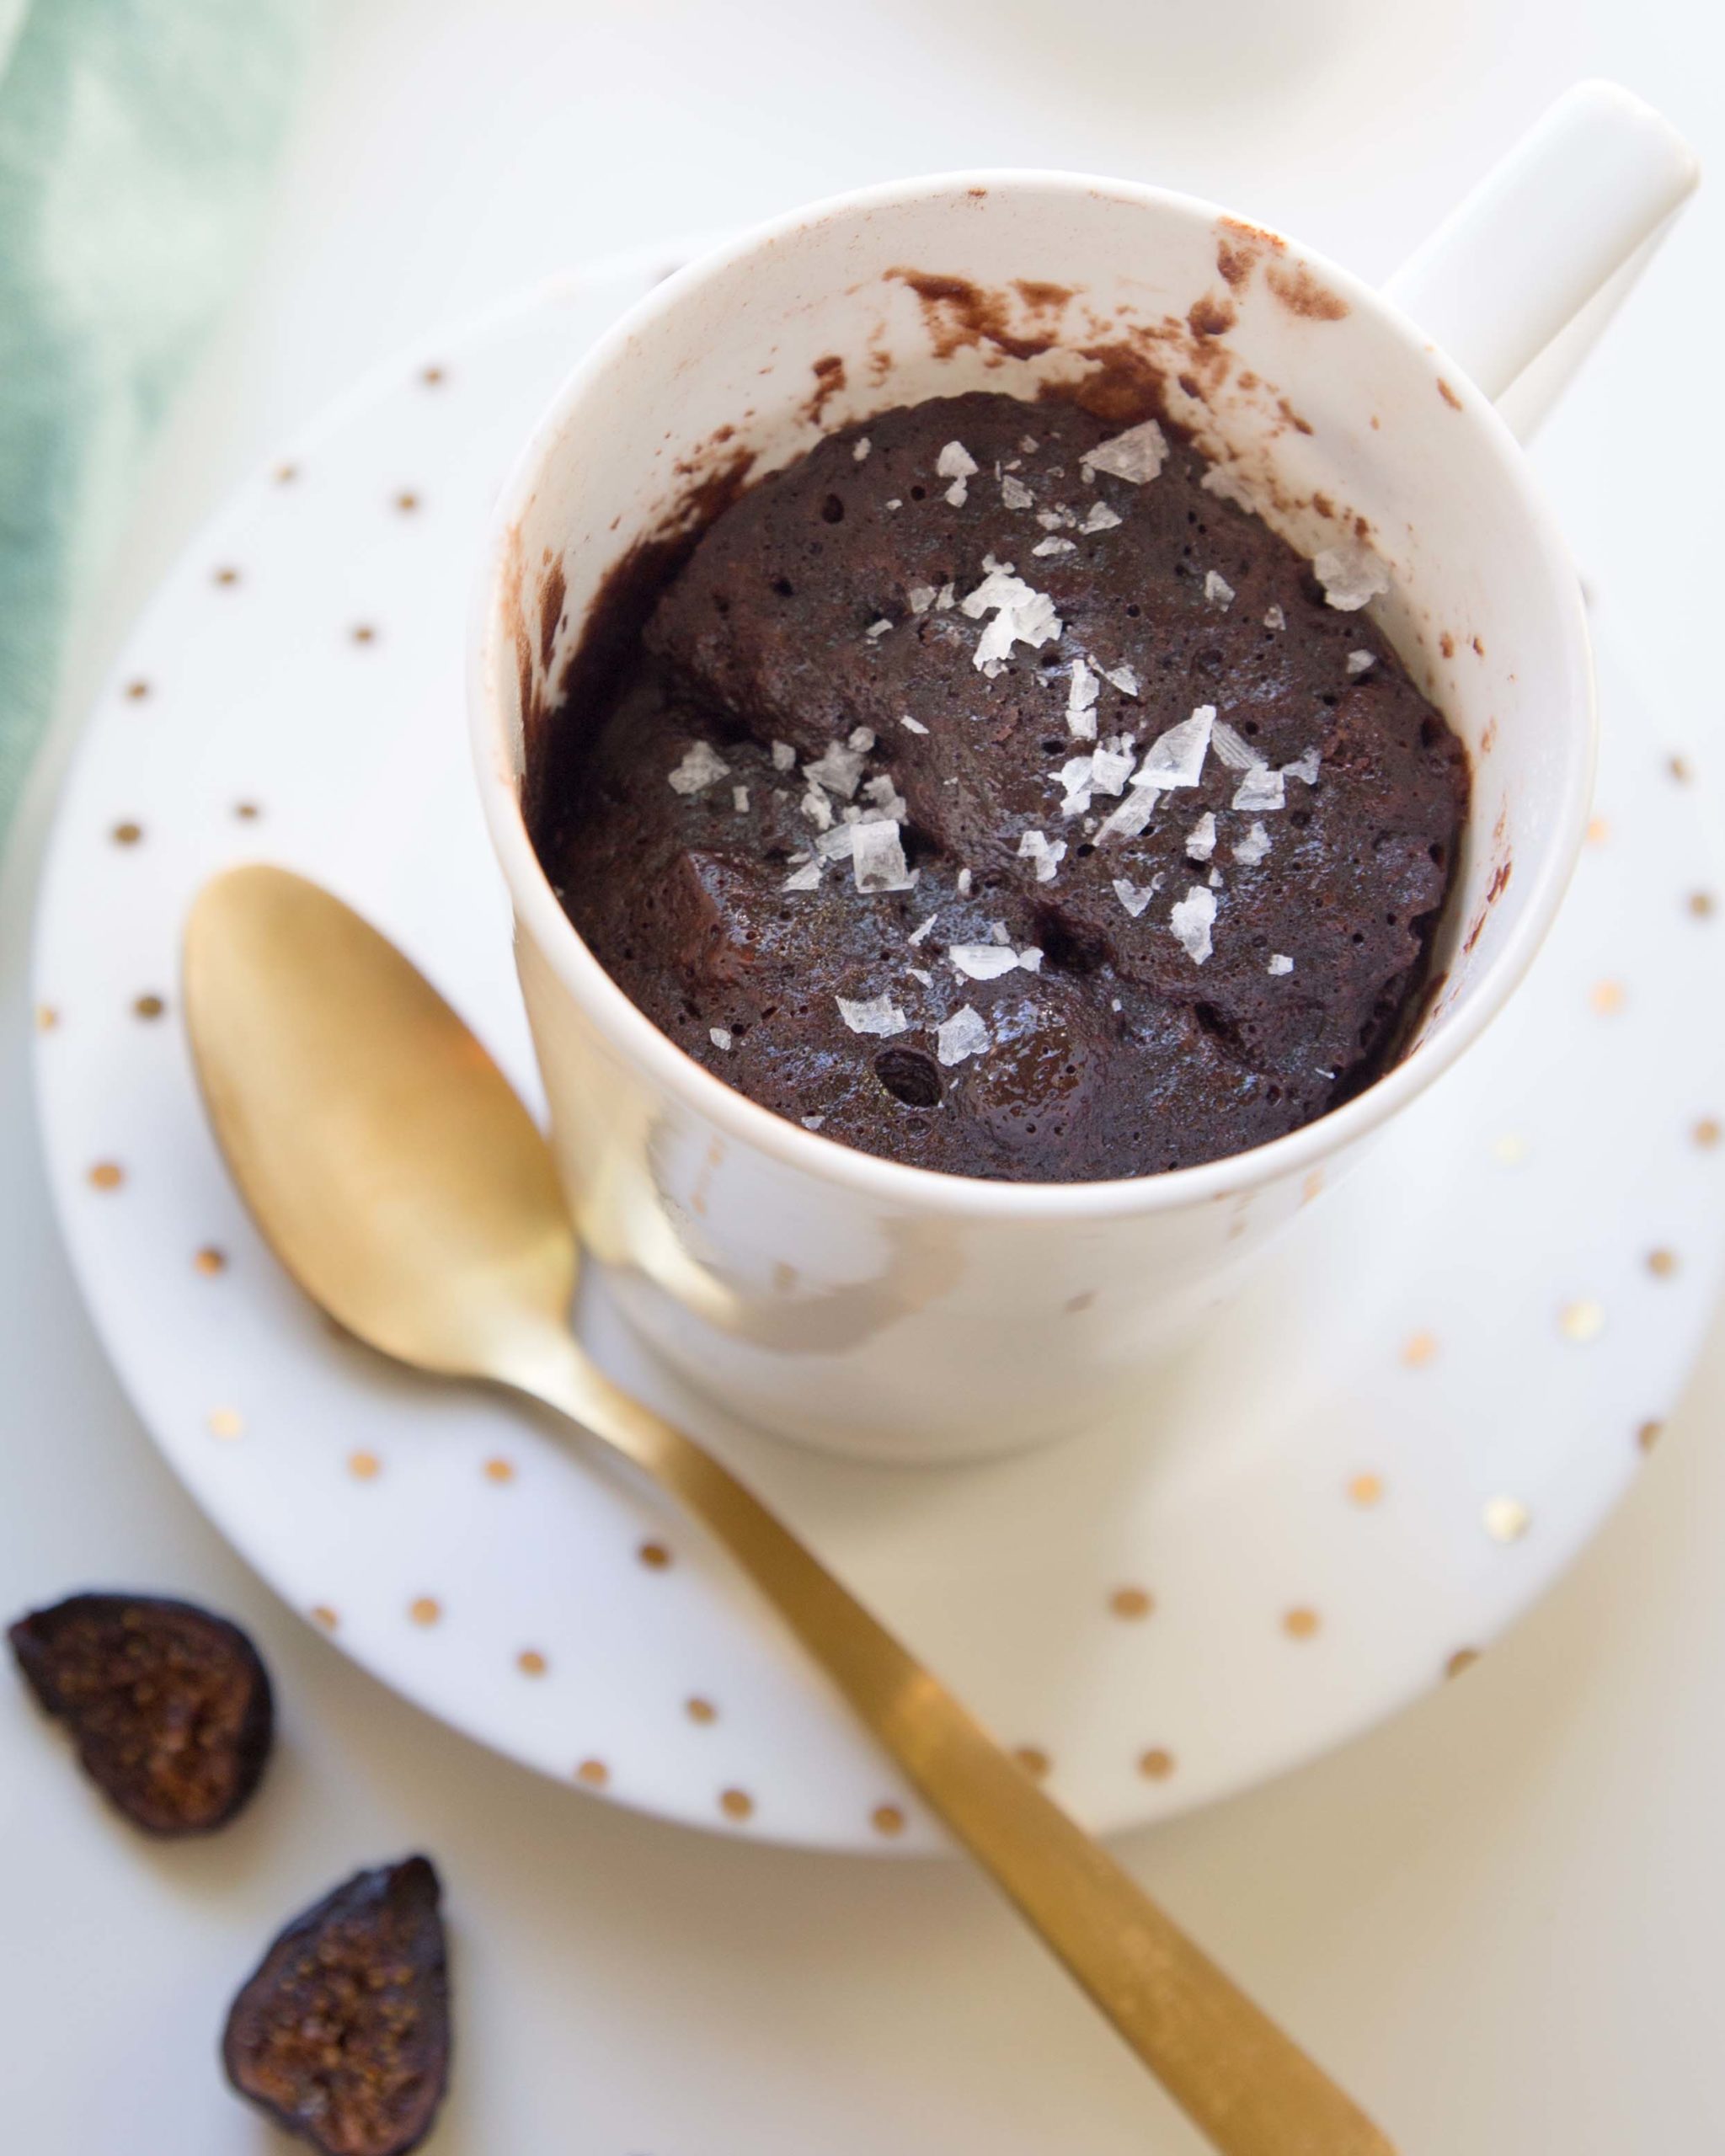 https://valleyfig.com/wp-content/uploads/2020/05/Microwave-Mug-Cake-with-Nutella-and-Figs-credit-anneliesz-hero-8752V-scaled.jpg